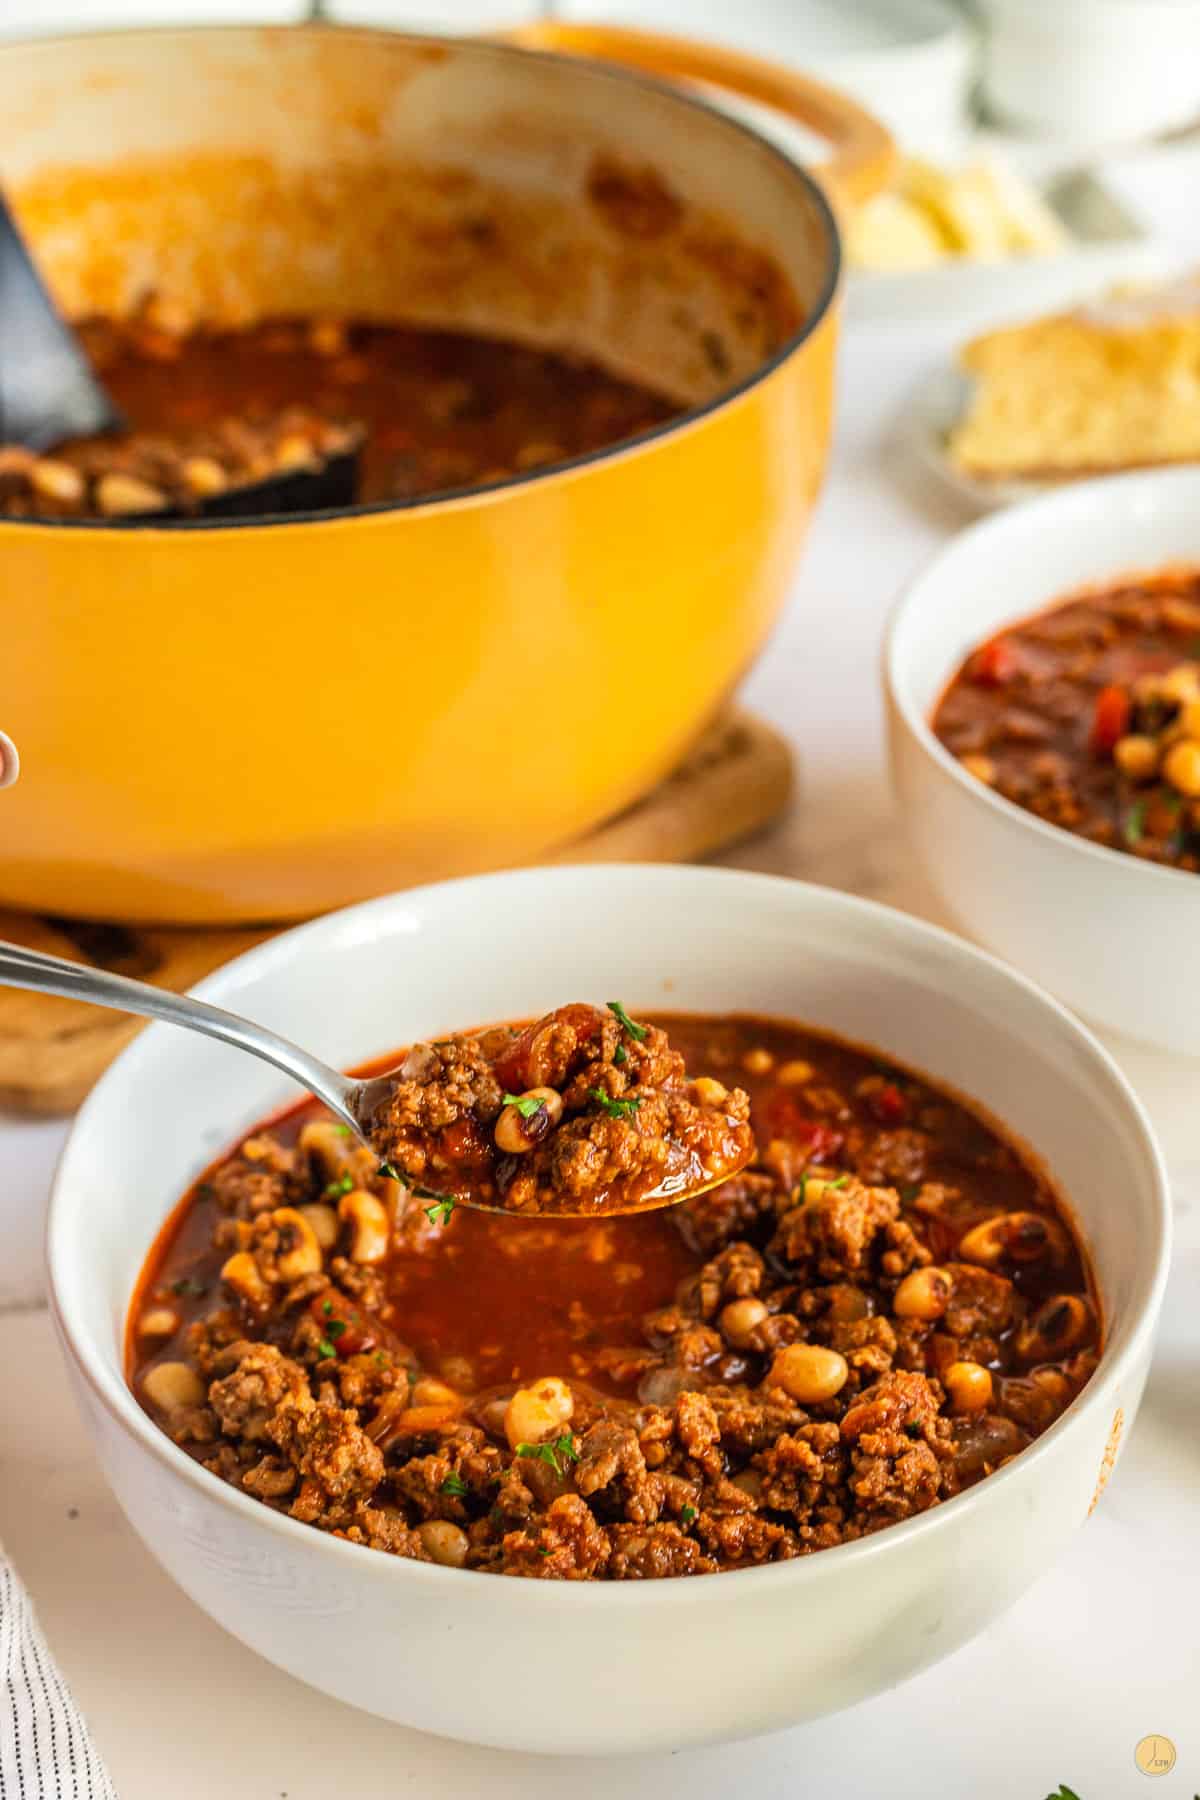 black eyed pea chili is great for new years day